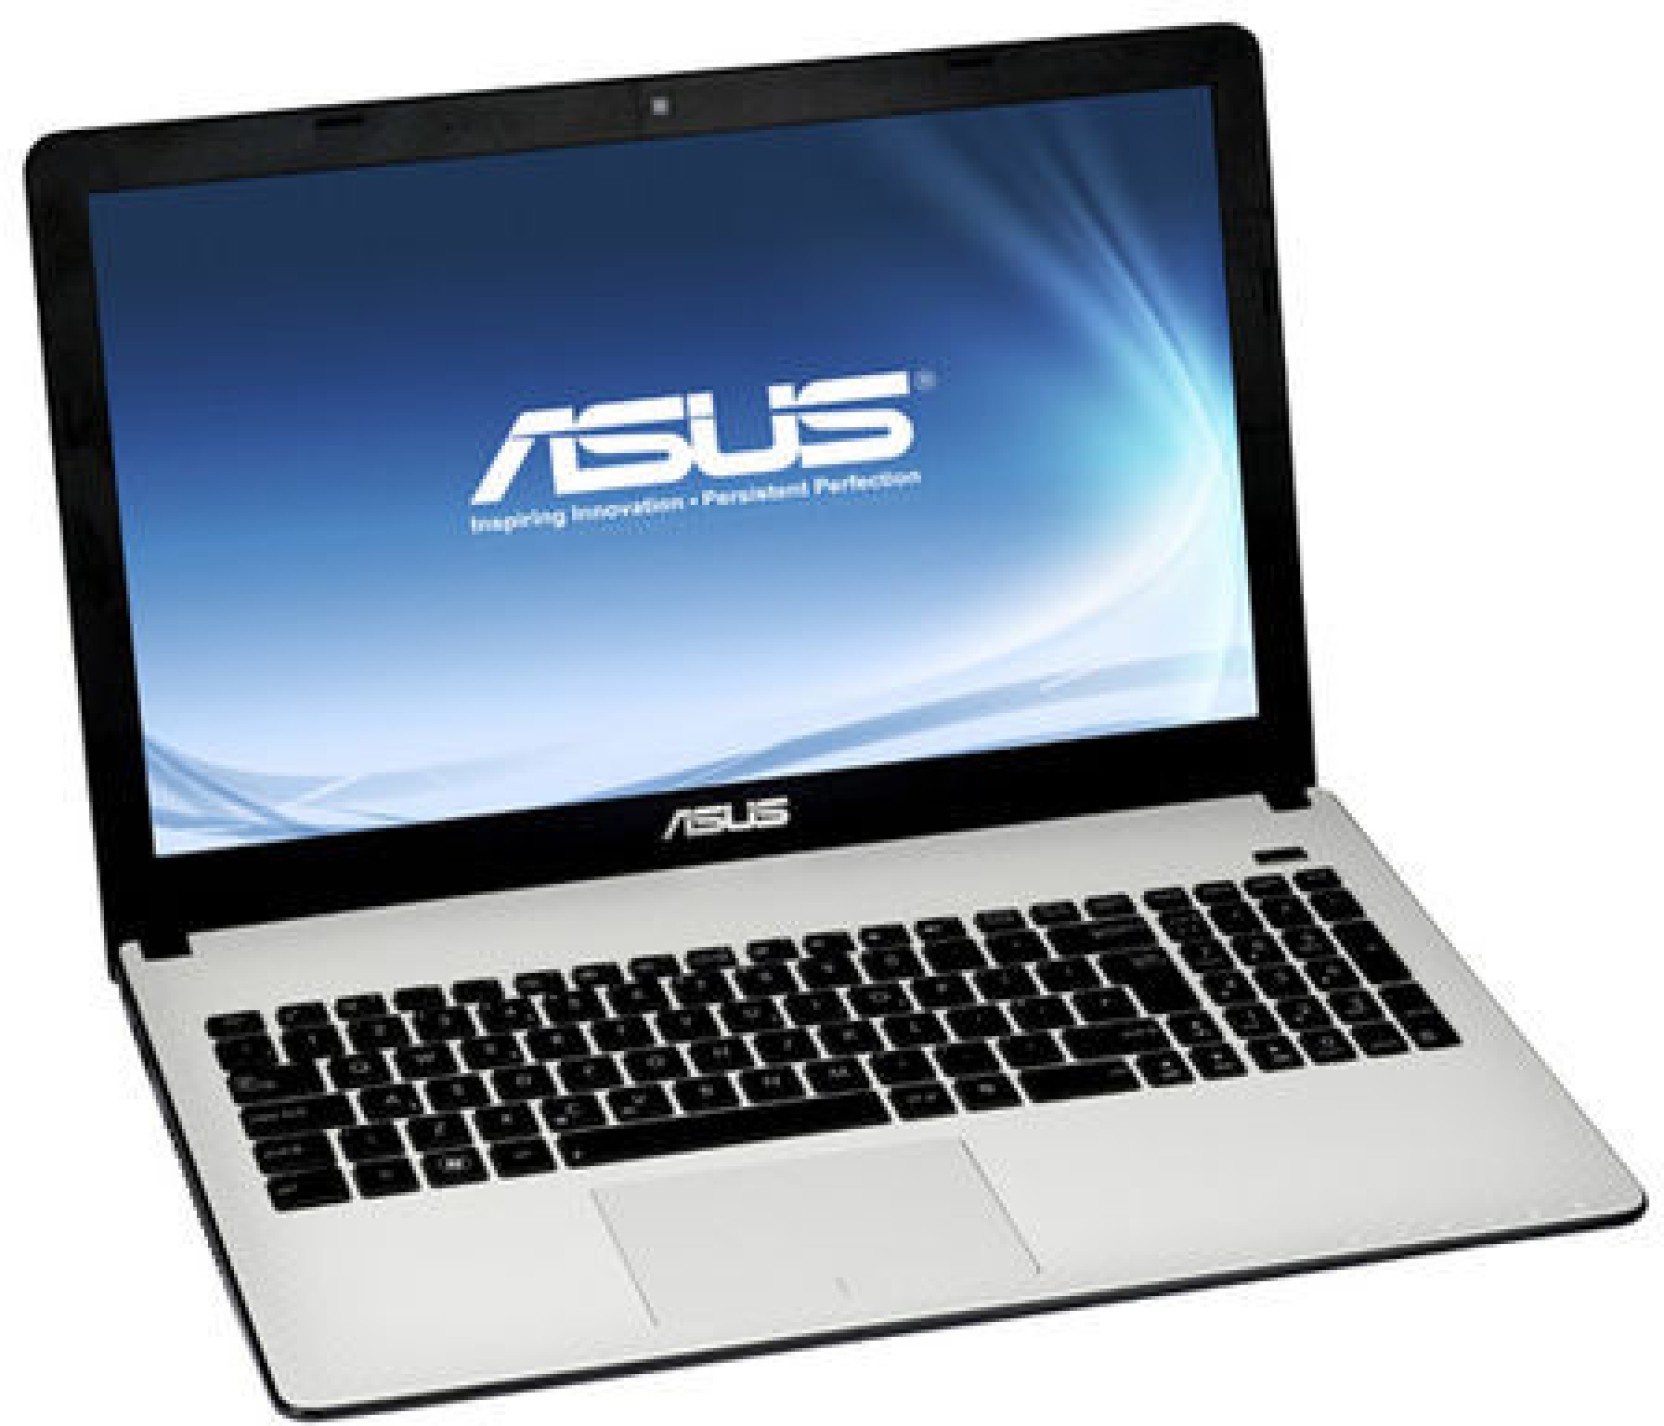 Asus X501A-XX517D Notebook (CDC/ 2GB/ 500GB/DOS) (White)  (15.6 inch, White, 2.07 kg)